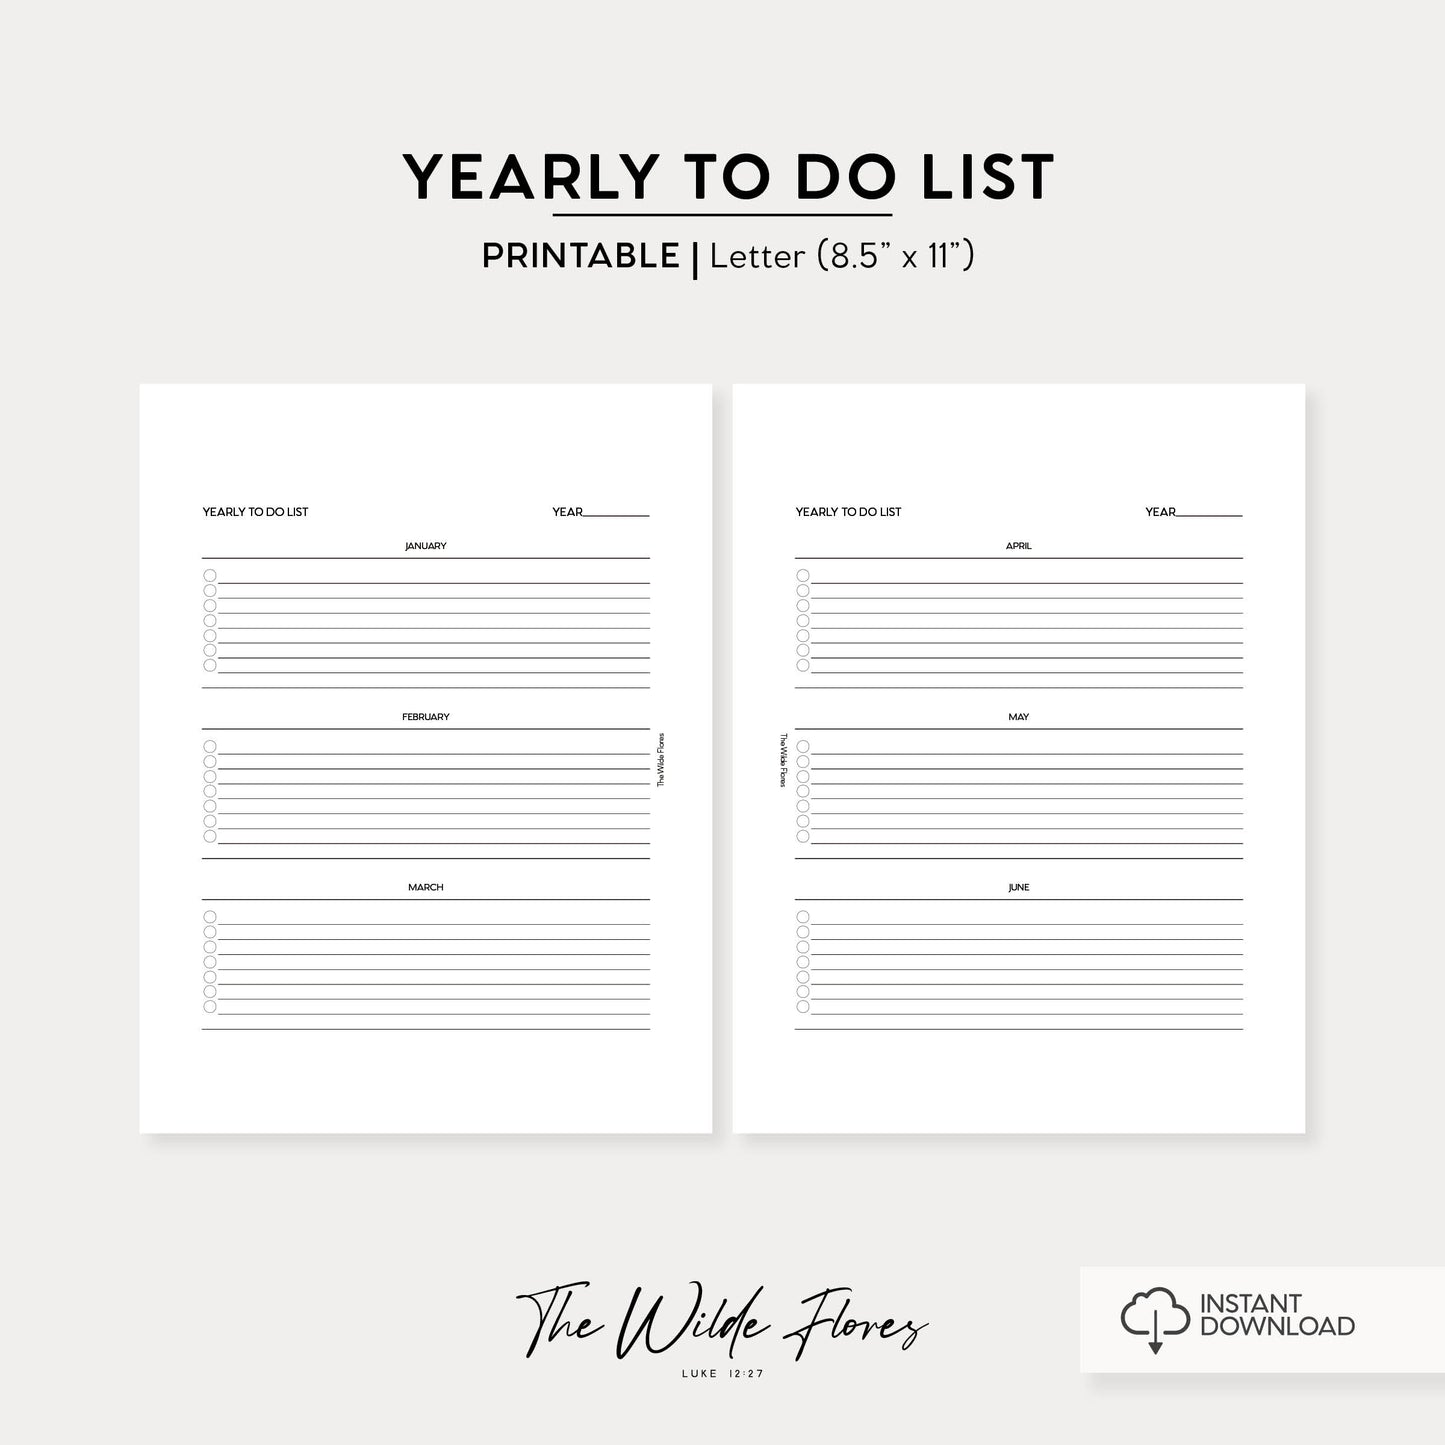 Yearly To Do List: Letter Size Printable